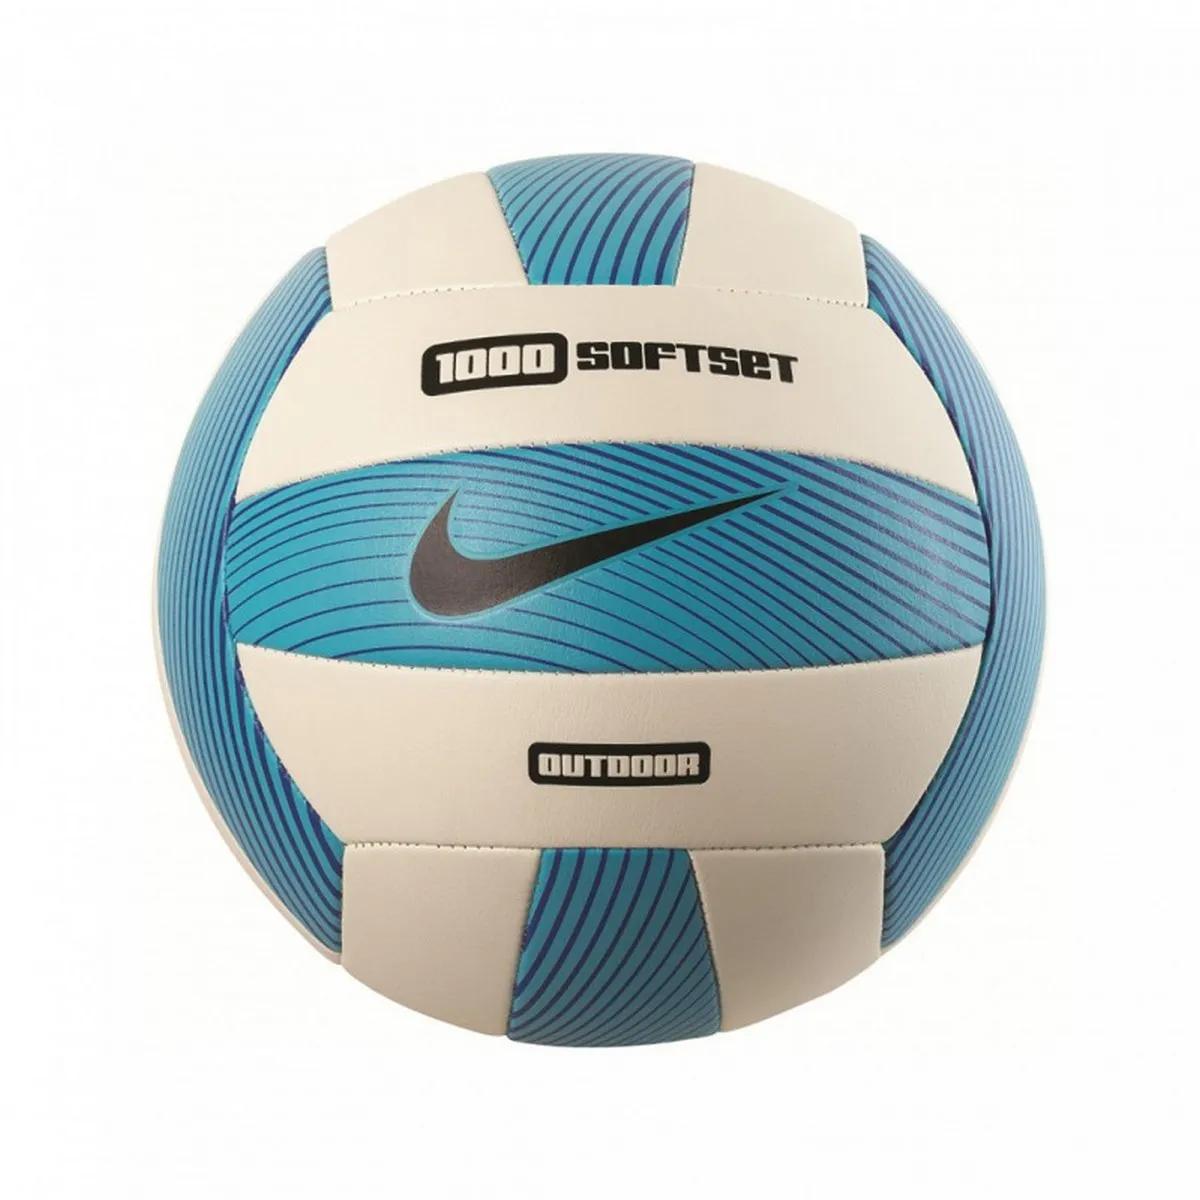 Nike Minge NIKE 1000 SOFTSET OUTDOOR VOLLEYBALL DEF 